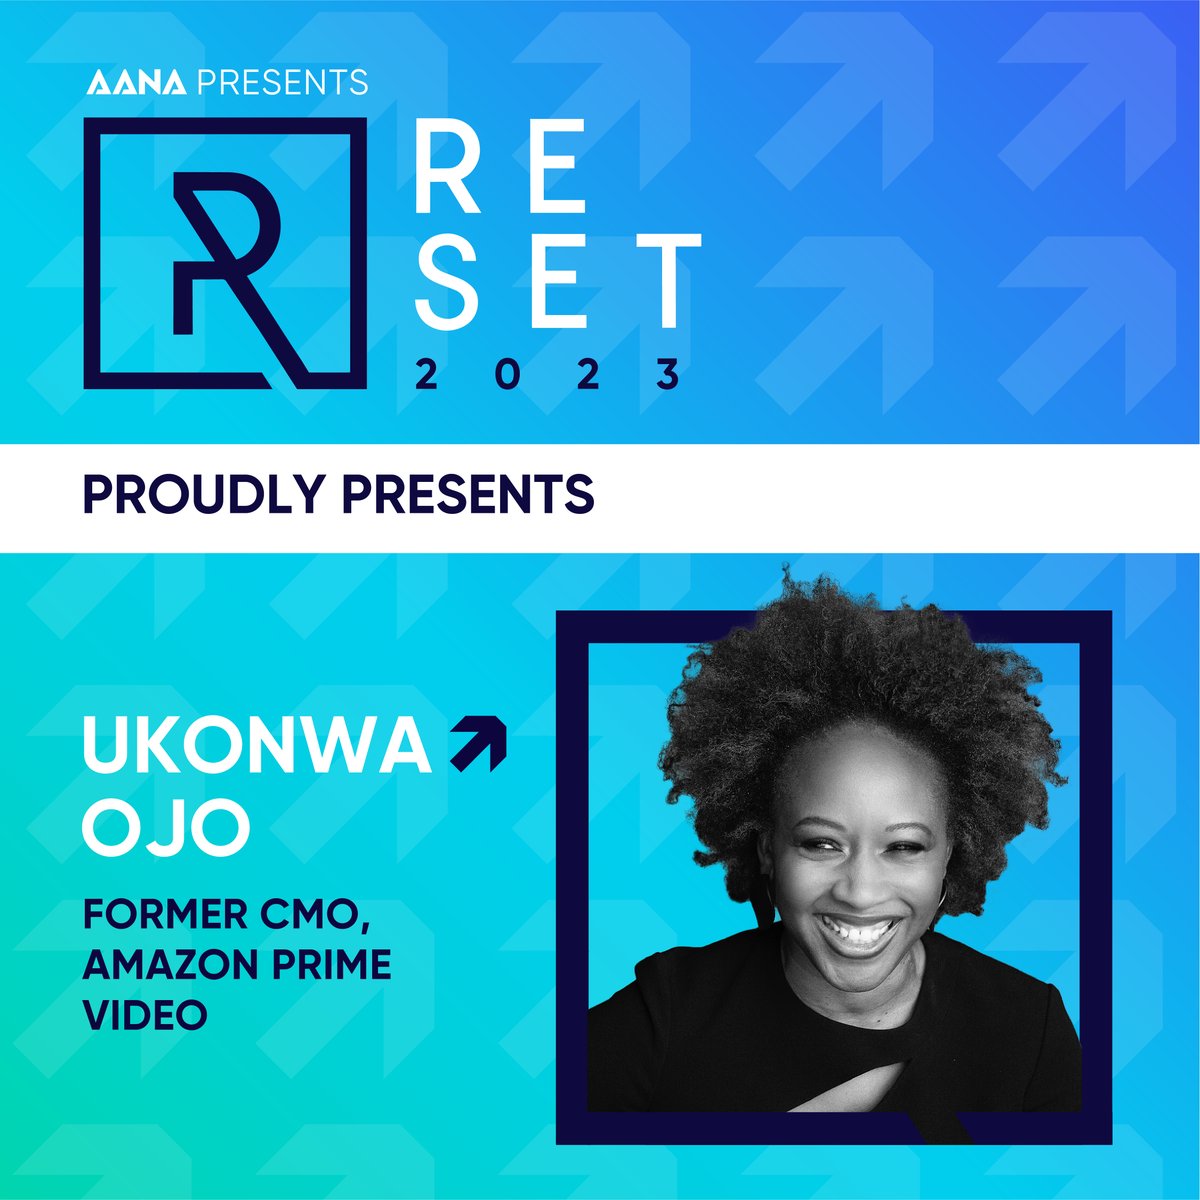 Big news! Global marketing powerhouse @ukonwaojo is joining us at #RESET! Ukonwa will draw on her experience to share exclusively how to combine bravery and humility to drive lasting business impact. Find out more: bit.ly/3EXkhzO